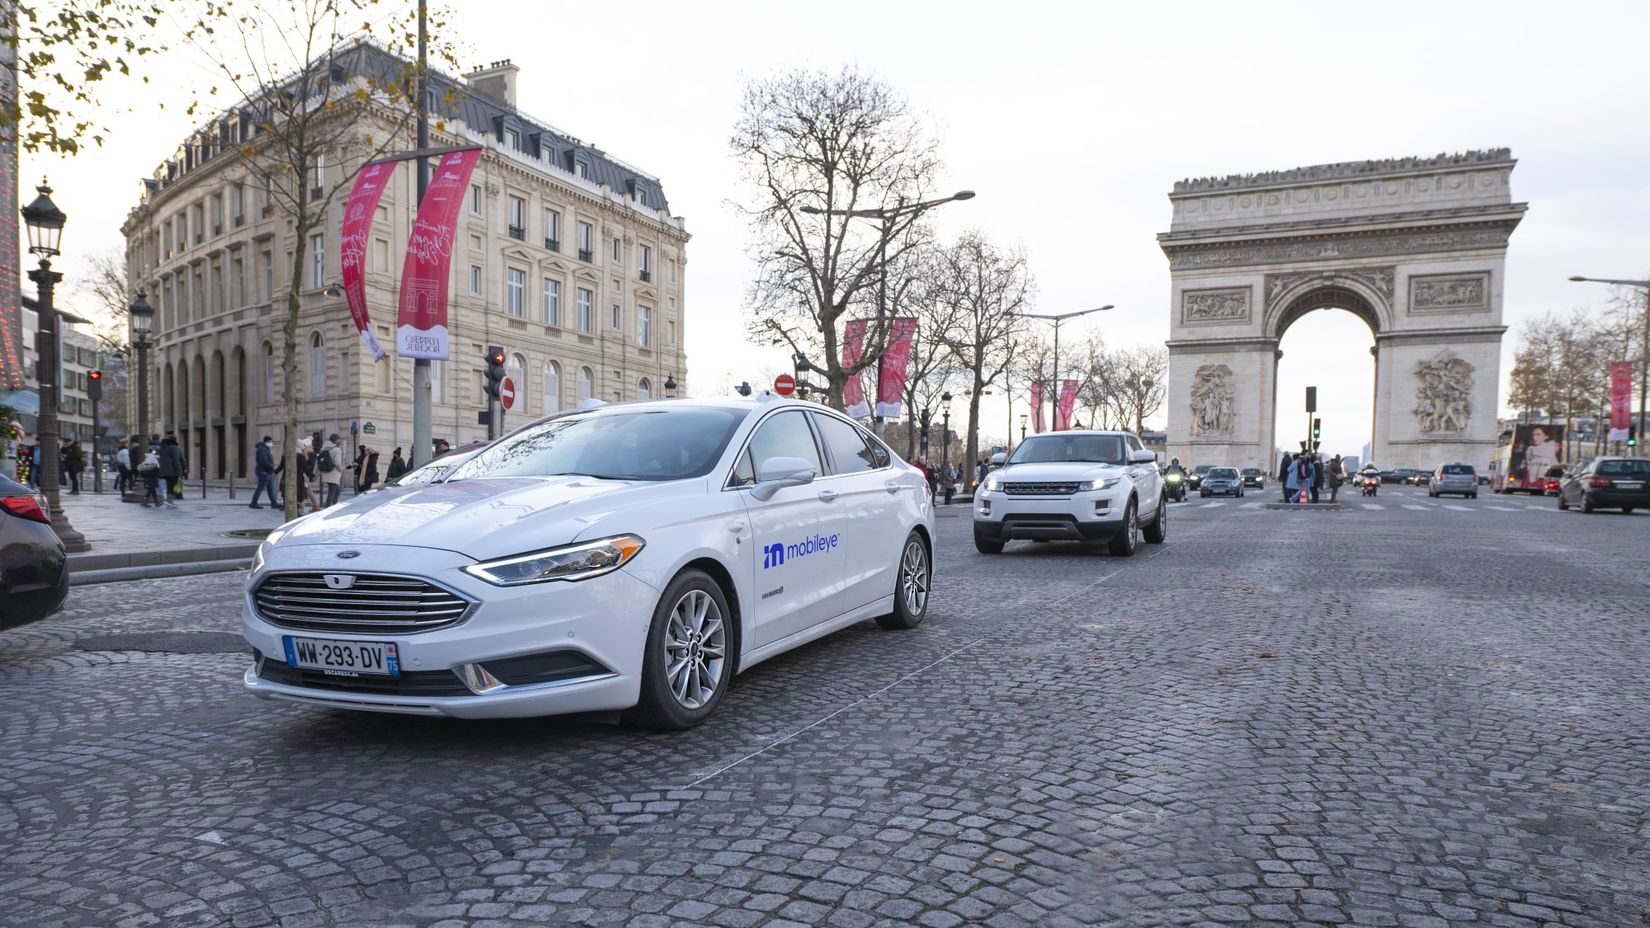 A Mobileye self-driving vehicle operates autonomously while testing on the Champs-Élysées in Paris, France.